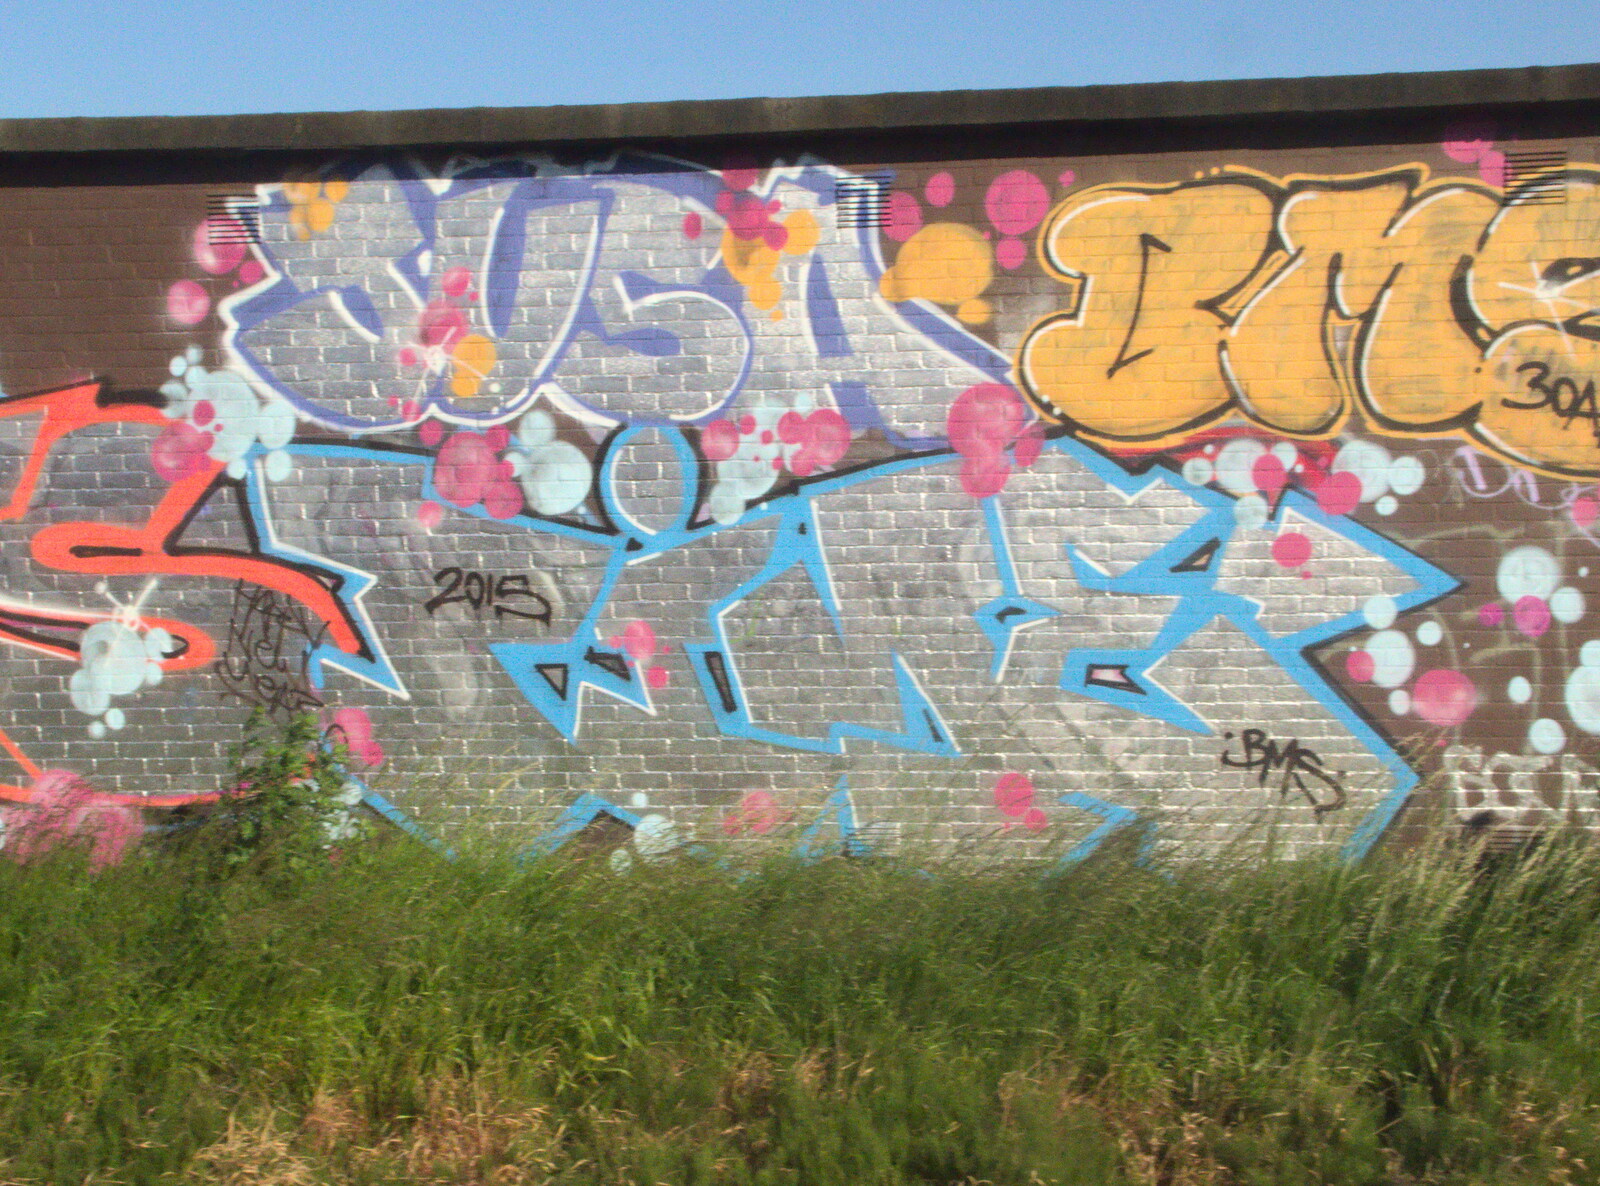 Colourful graffiti on a wall near Wimbledon from SwiftKey Does AirSoft, Epsom, Surrey - 11th June 2015